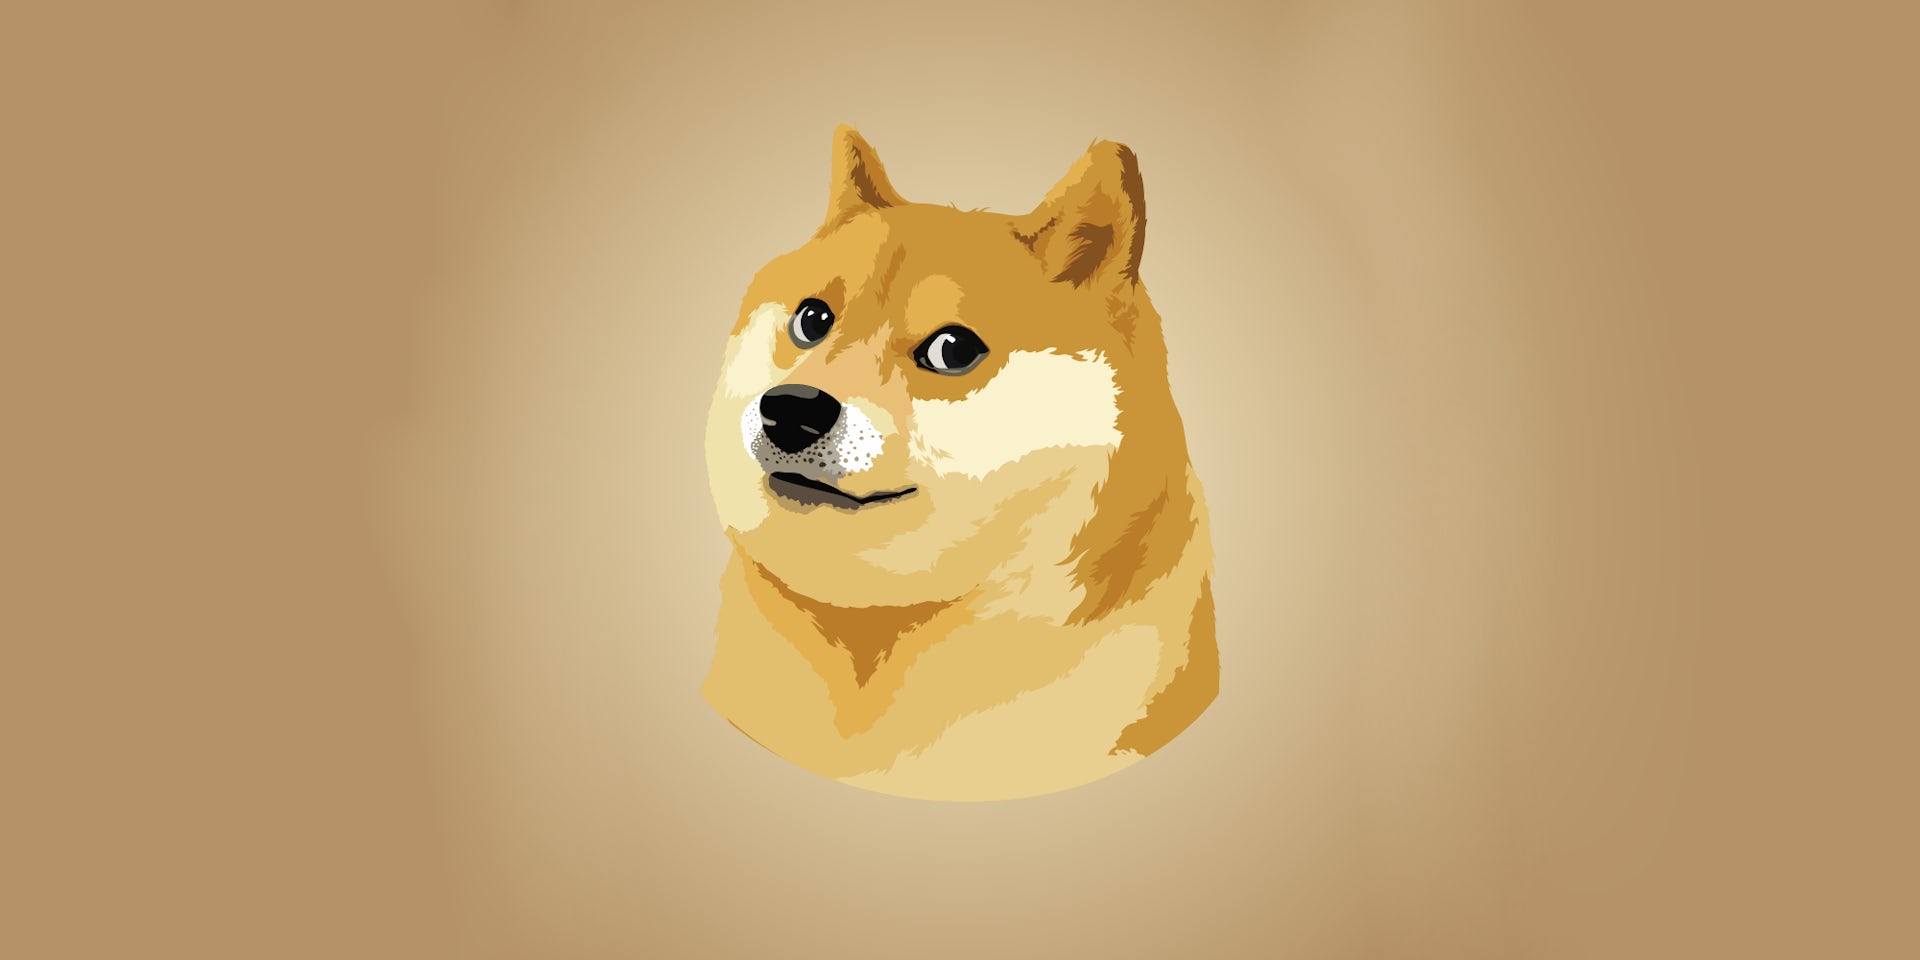 Doge - What does doge mean?